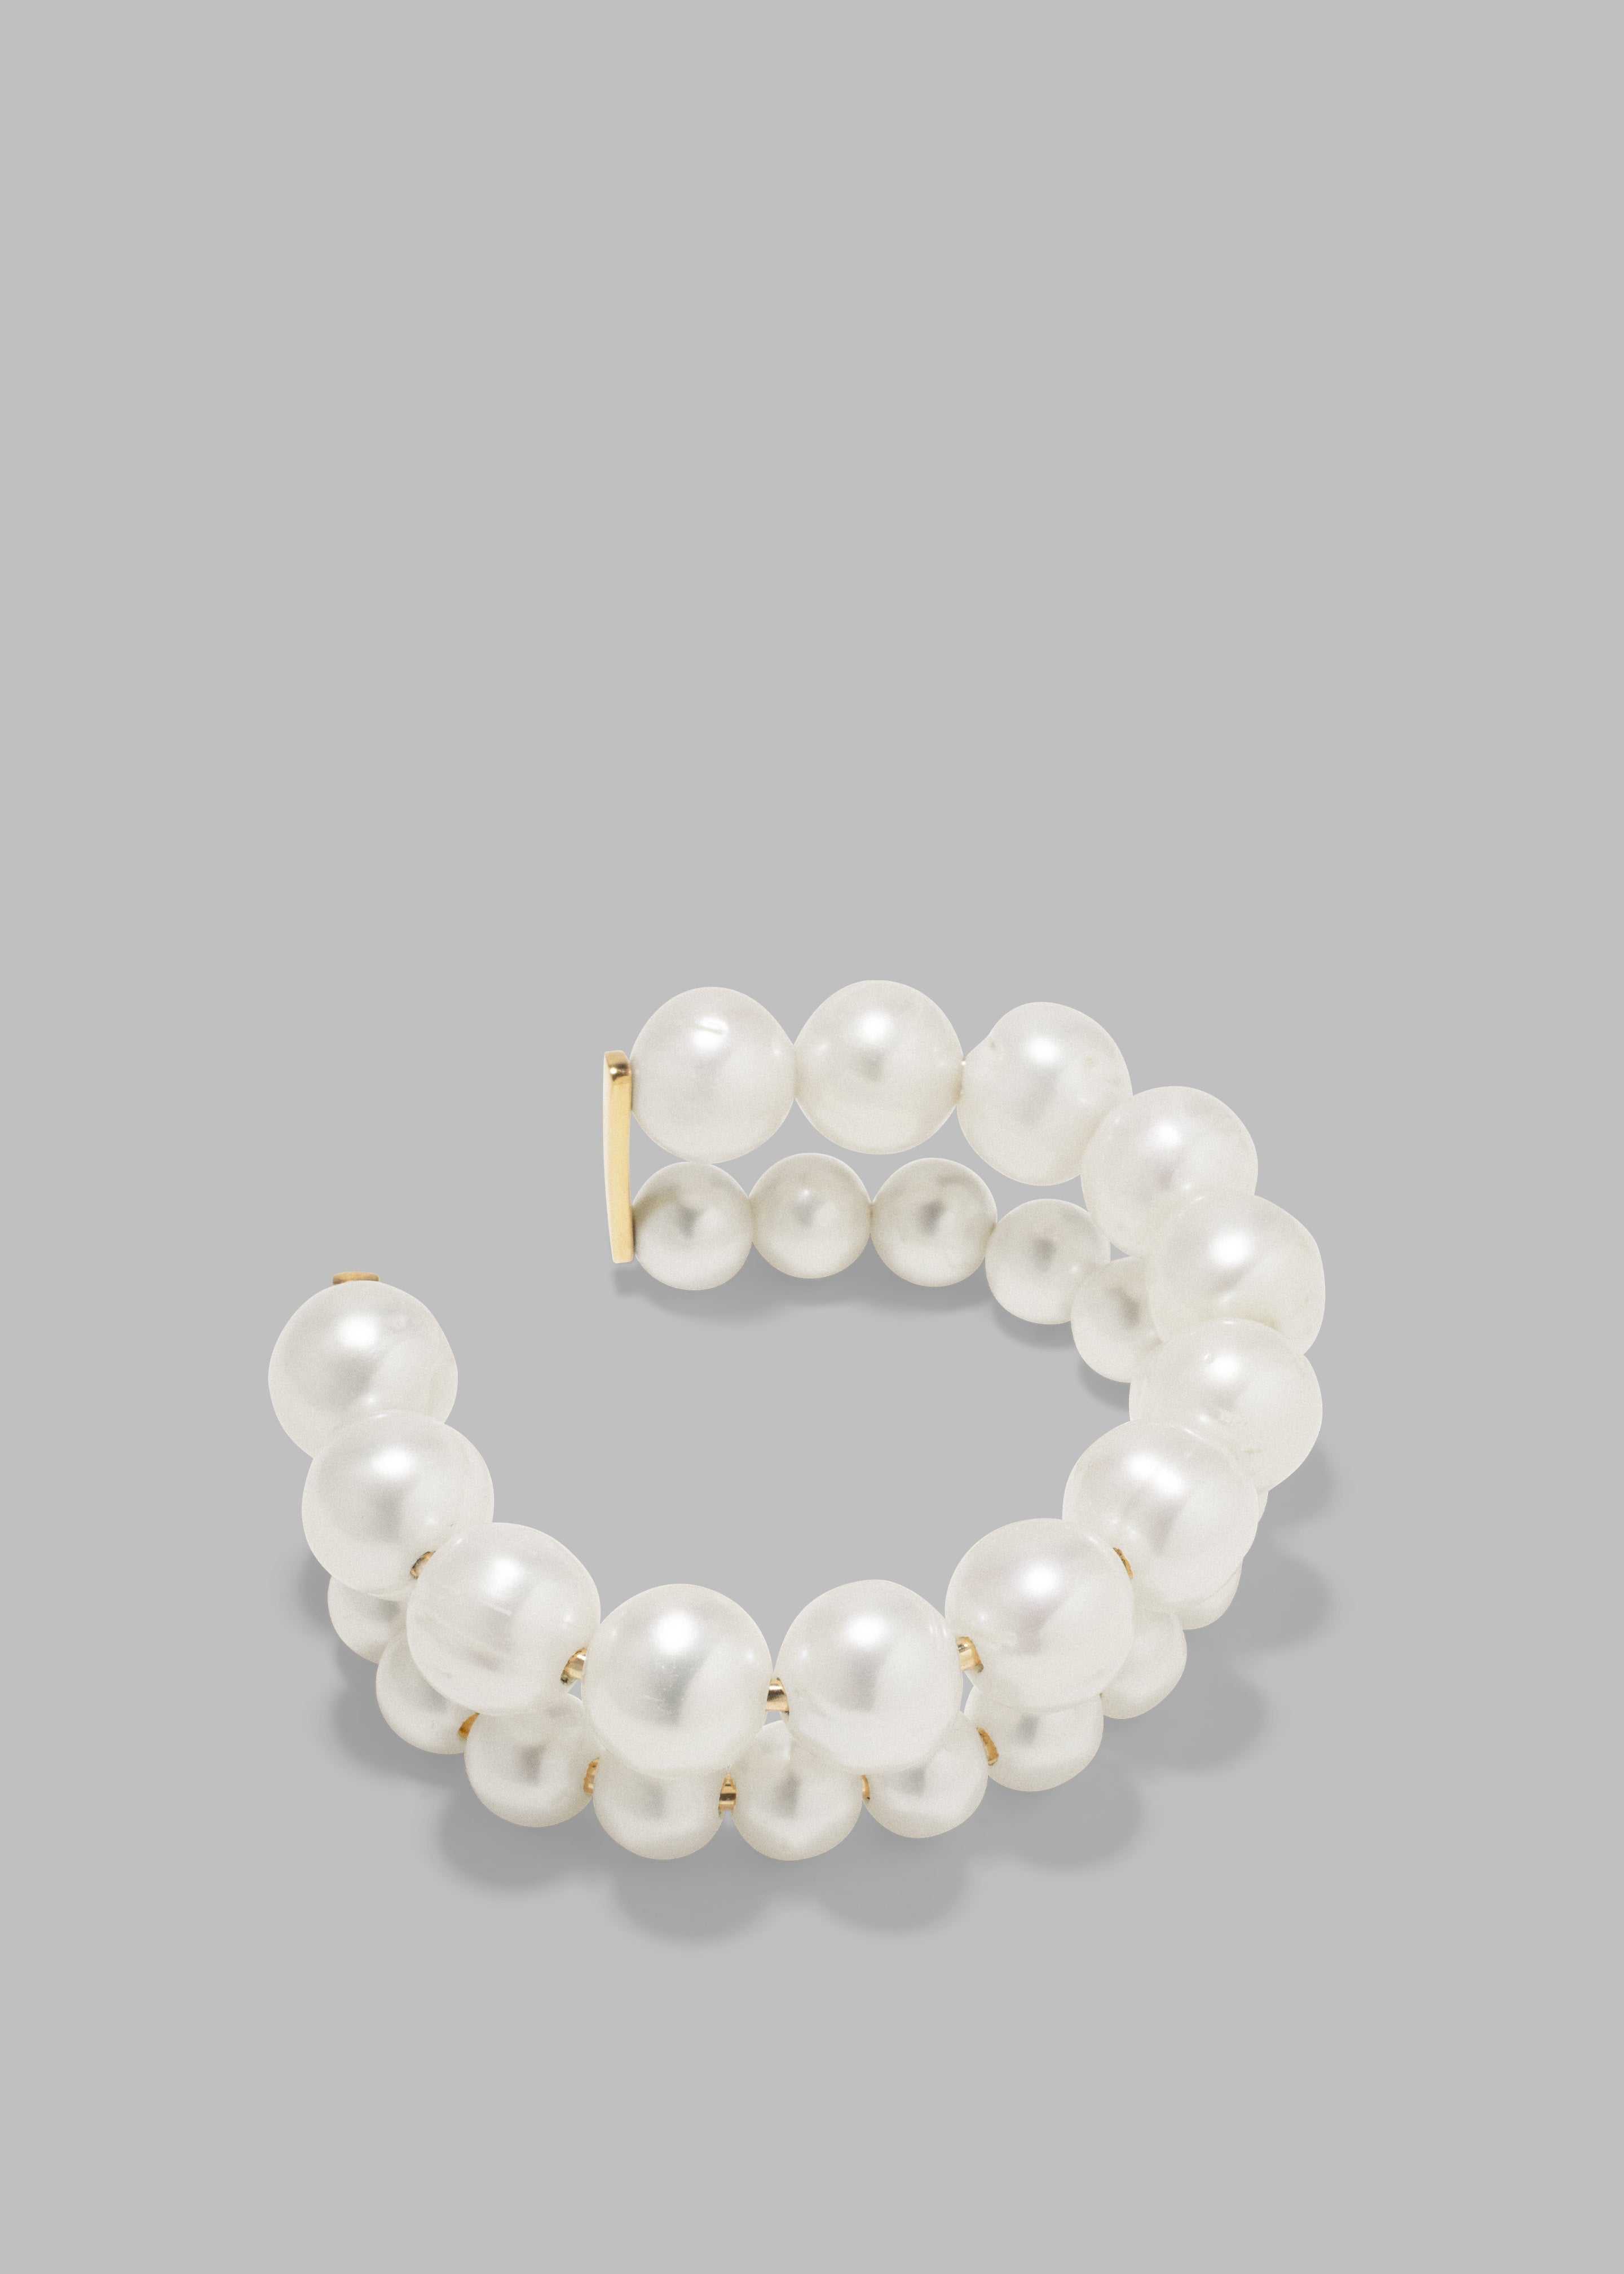 Completedworks One (Blank) Can Change the World Bracelet Cuff - Pearl/Gold Vermeil - 2